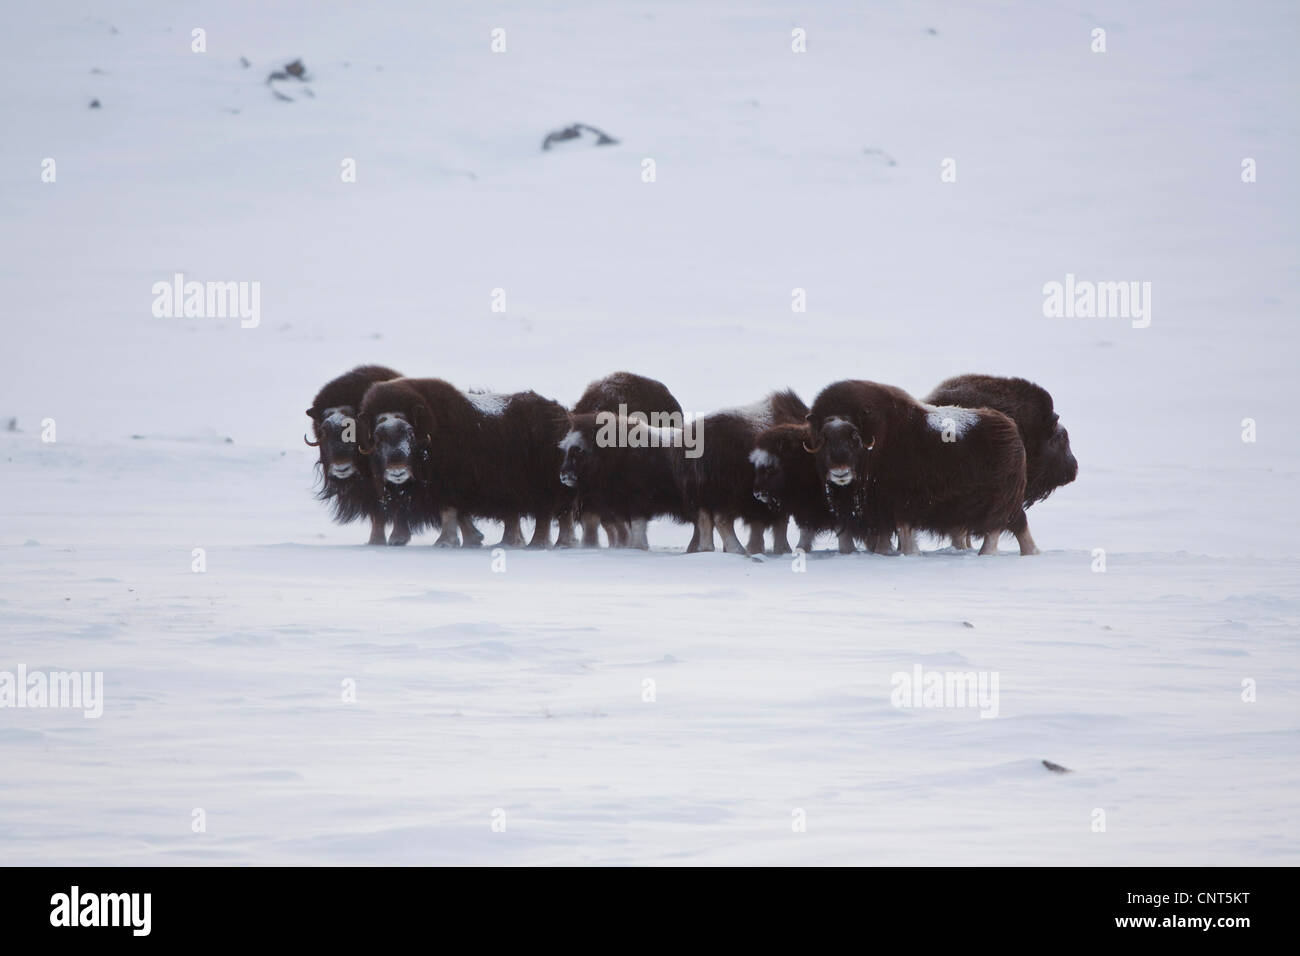 muskox (Ovibos moschatus), herd with calves in snowy landscape, Norway, Dovrefjell Sunndalsfjella National Park Stock Photo